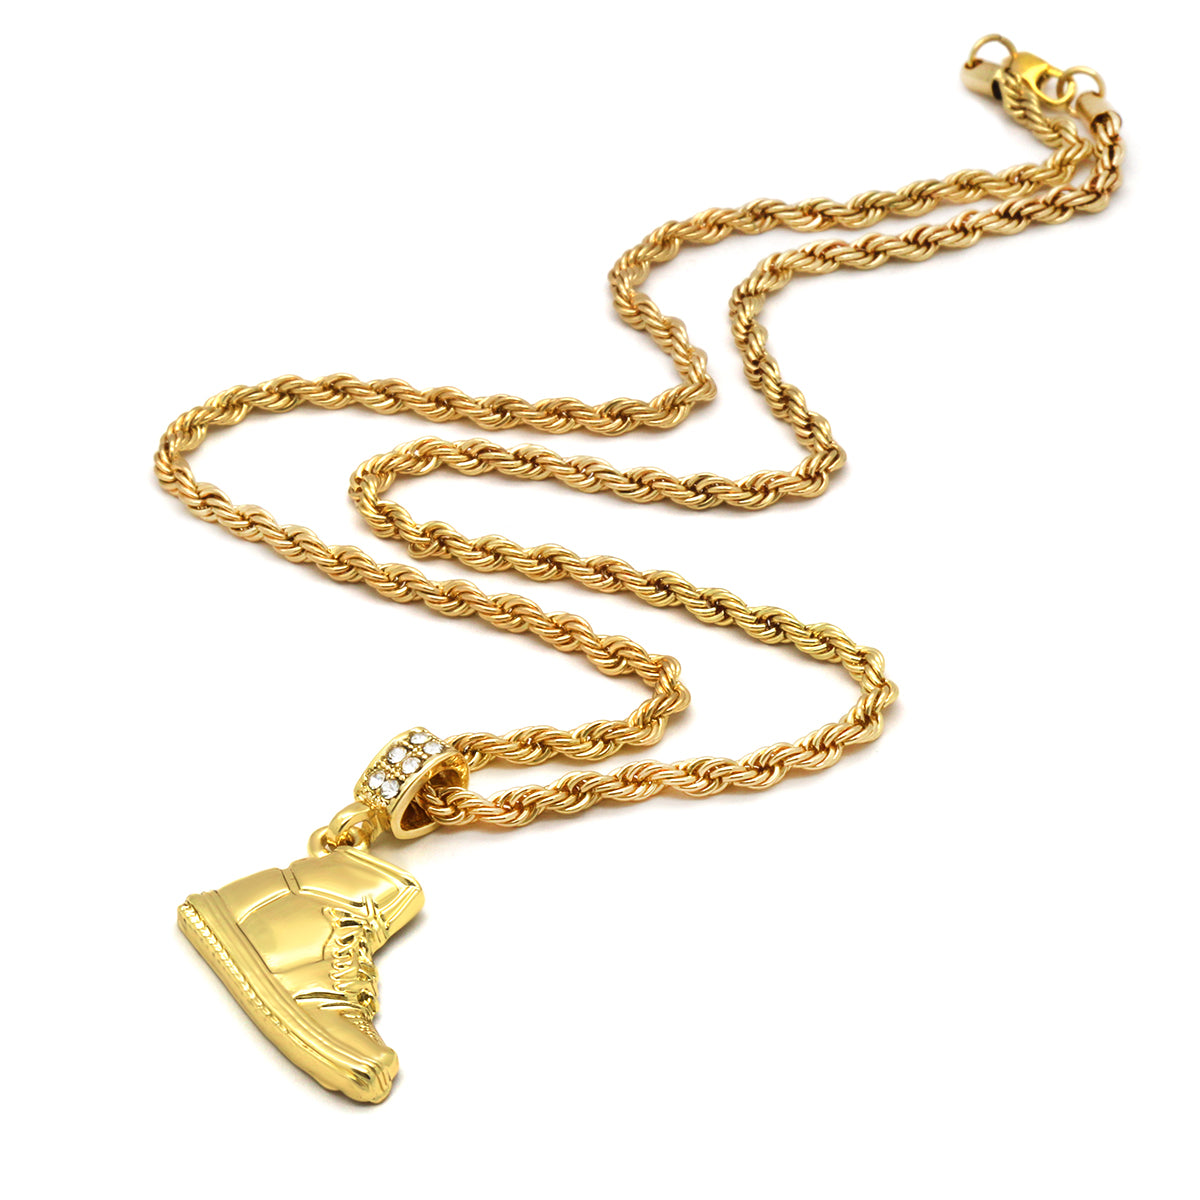 14K GOLD PLATED RETRO 1 PENDANT WITH GOLD ROPE CHAIN